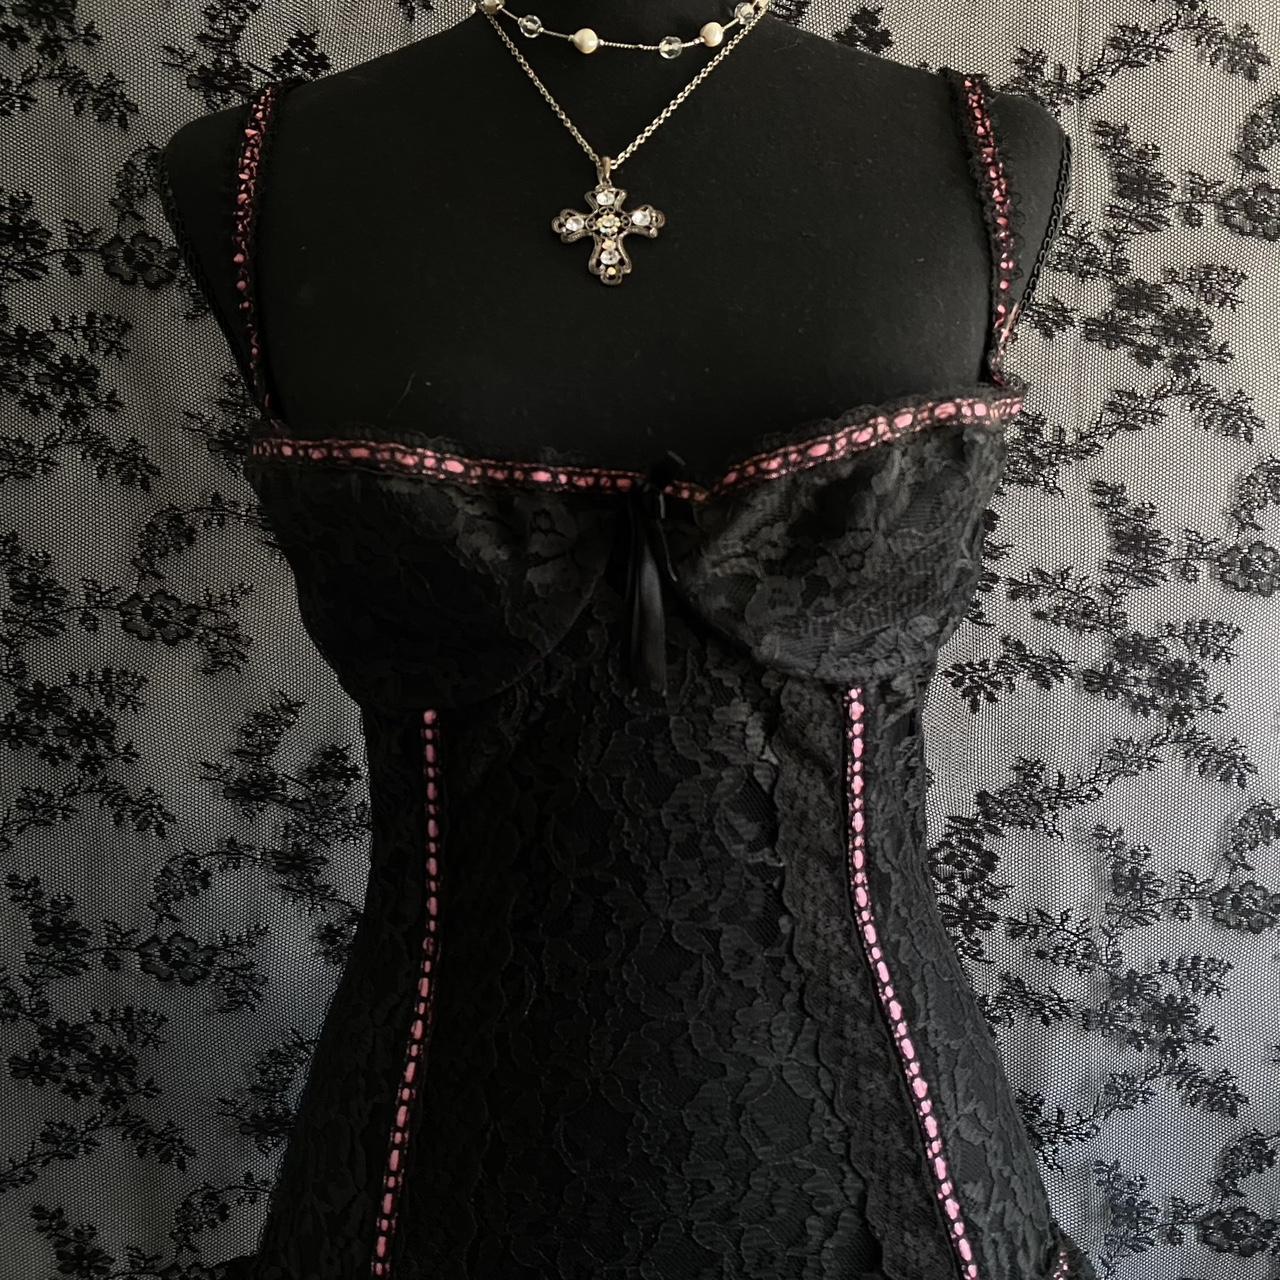 American Vintage Women's Black and Pink Corset (5)